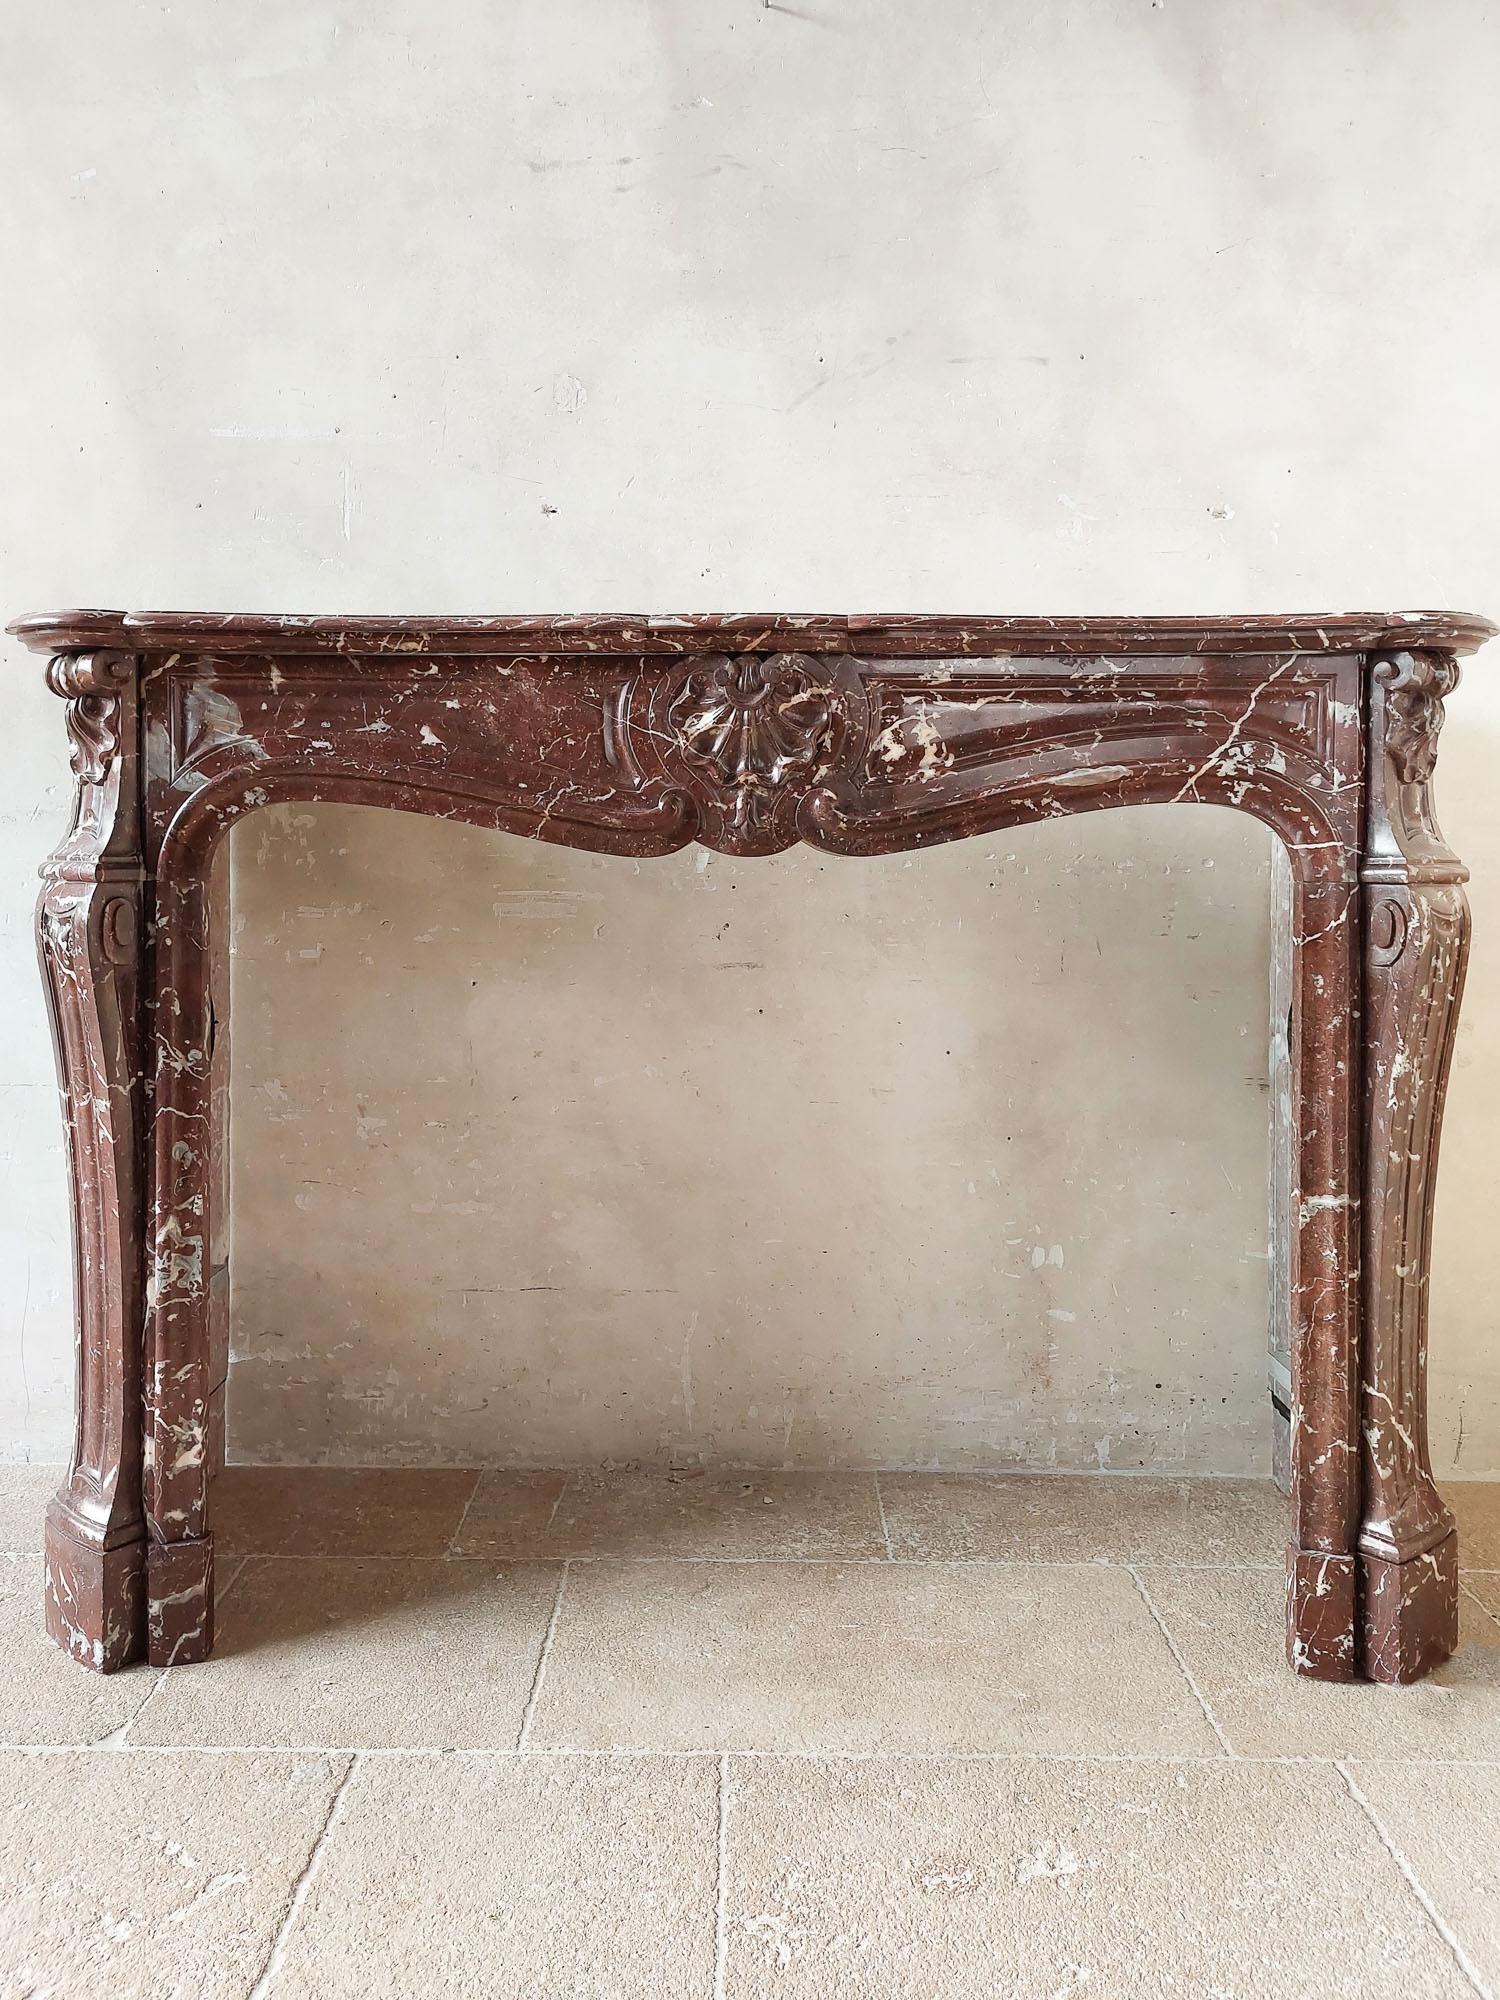 Antique, rich, hand-carved Trois Coquilles mantelpiece in red marble, with gray and white accents (campan rouge marble).

dimensions: h 116 x w 166 x d 20.5 to 38.5 cm
internal dimensions: h 90 cm x w 121 cm